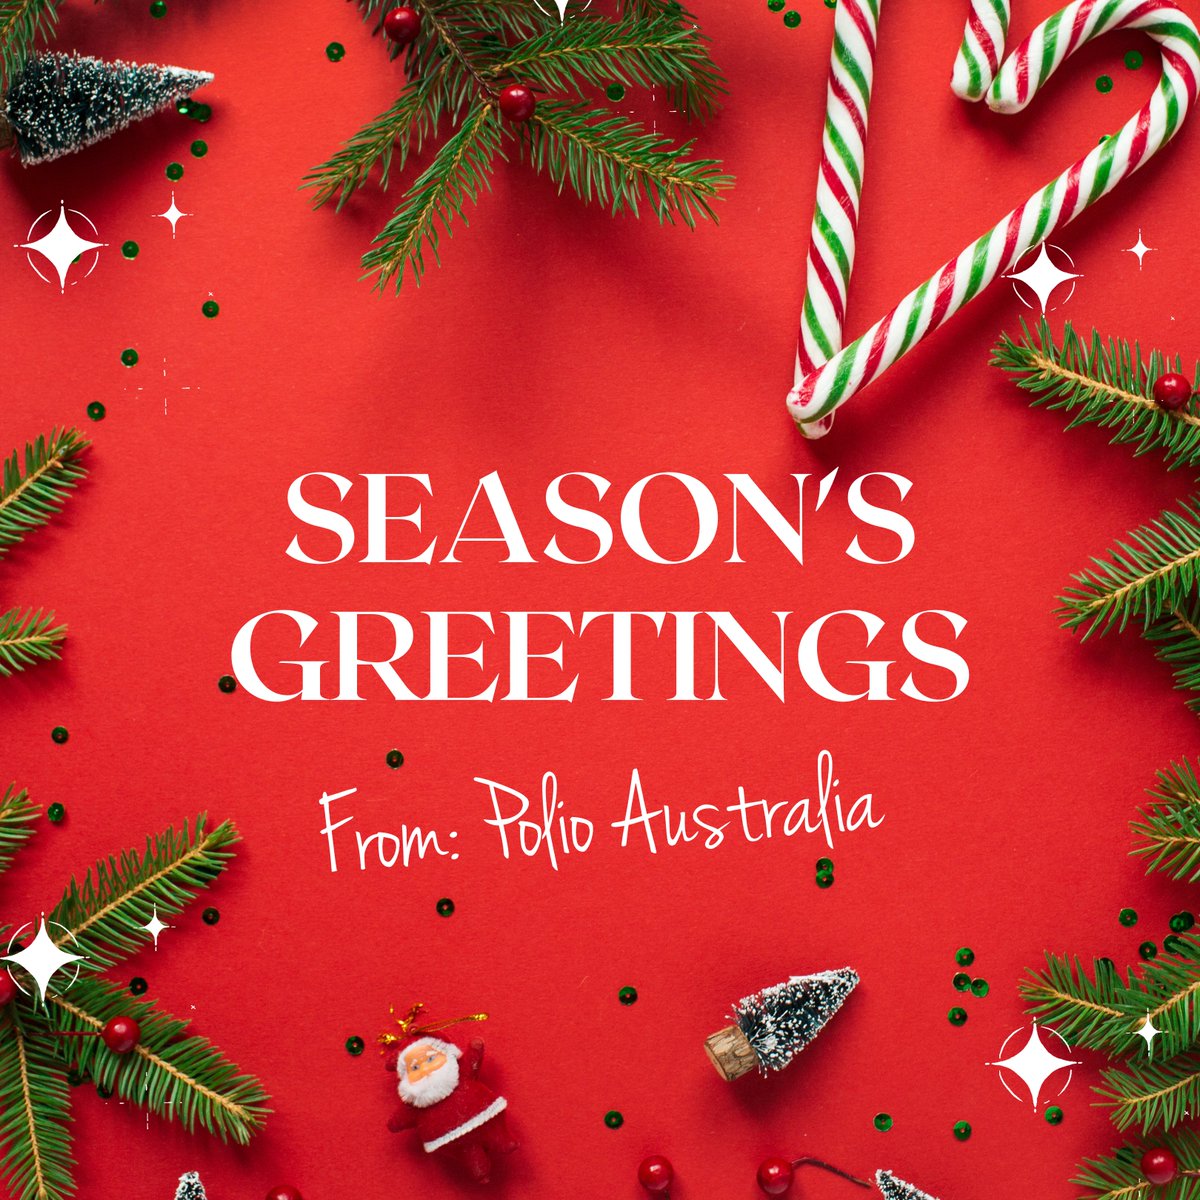 The team at Polio Australia would like to wish you all the best this holiday season. We look forward to reconnecting in the new year. 🎊